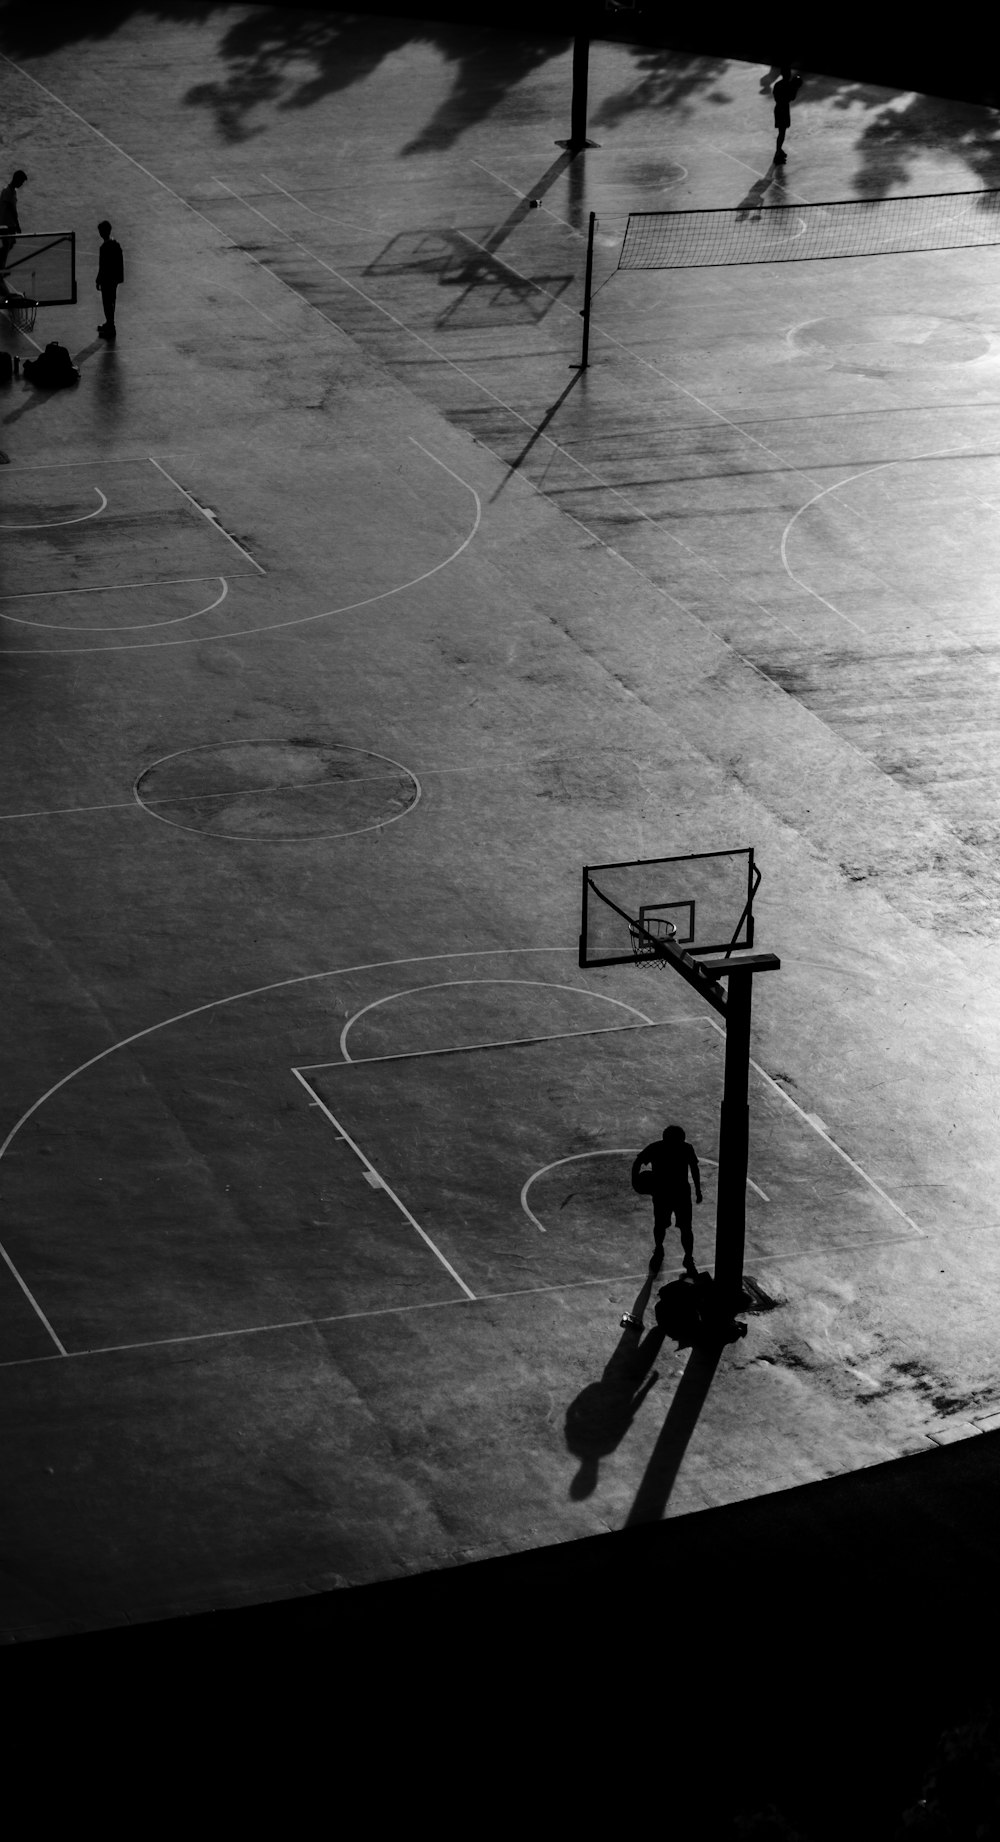 person walking on basketball court